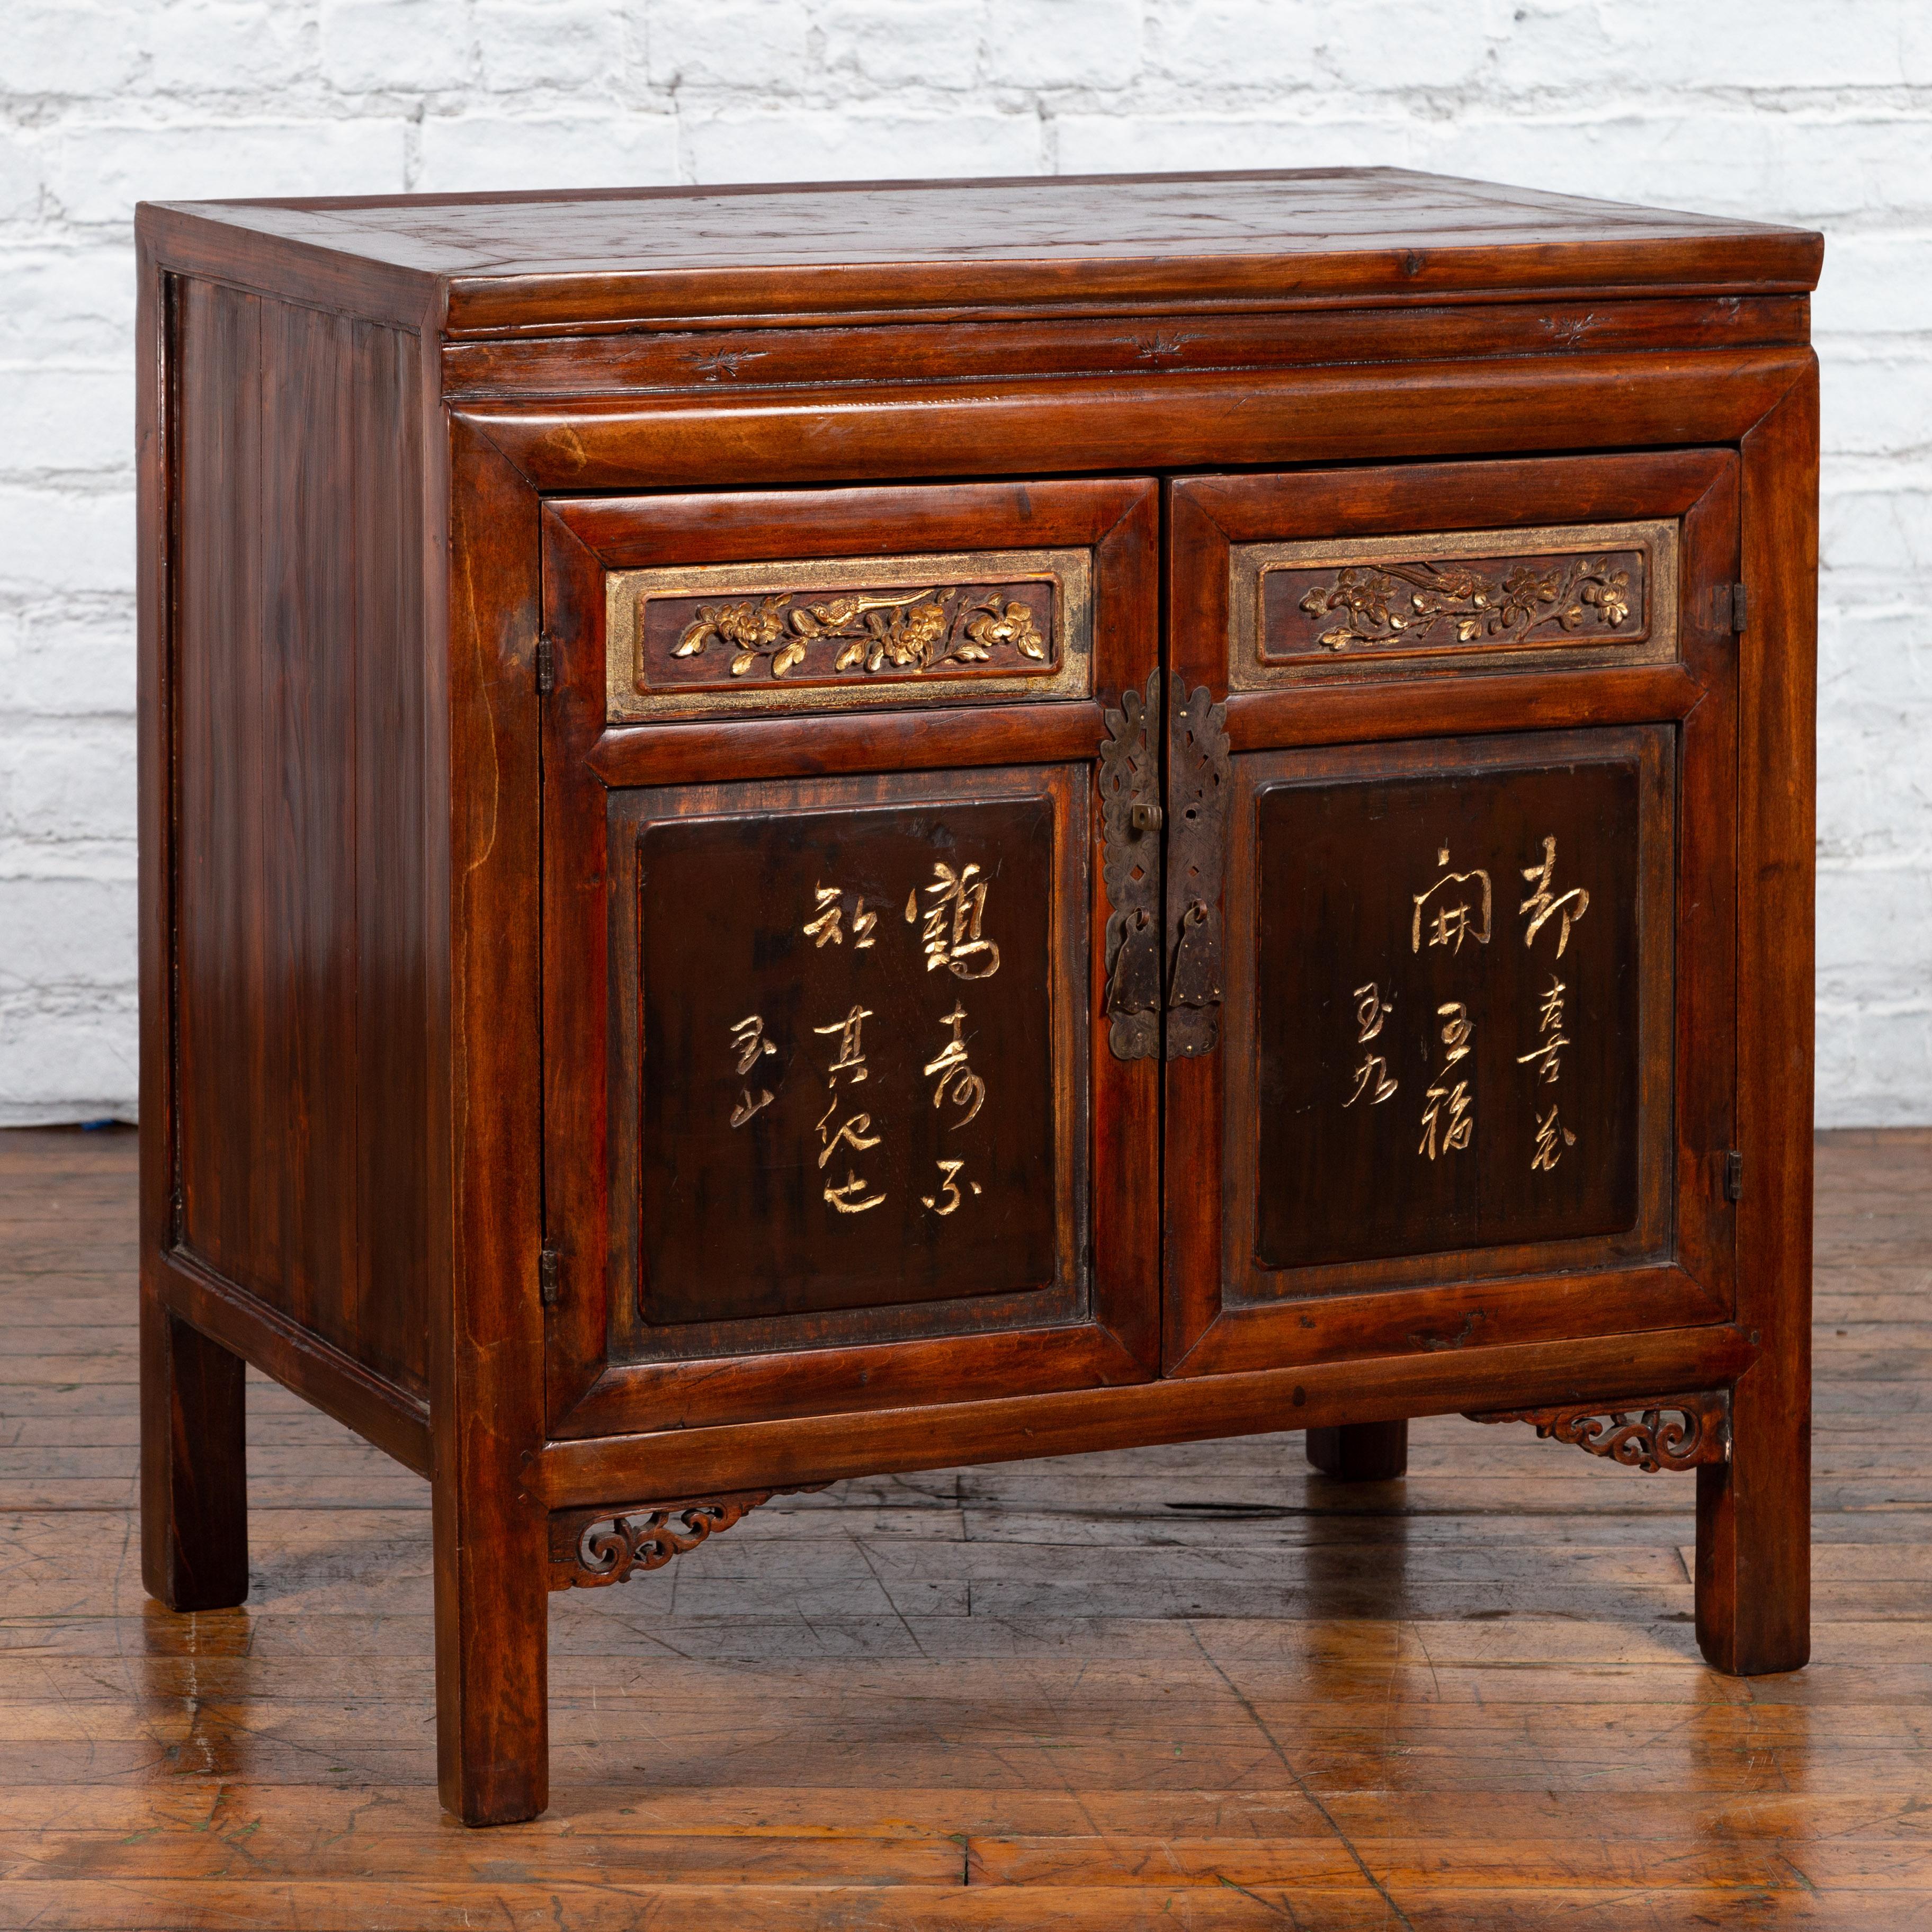 A Chinese antique cabinet from the early 20th century, with gilded calligraphy and carved floral motifs. Created in China during the early years of the 20th century, this cabinet features a rectangular top with central board, sitting above a